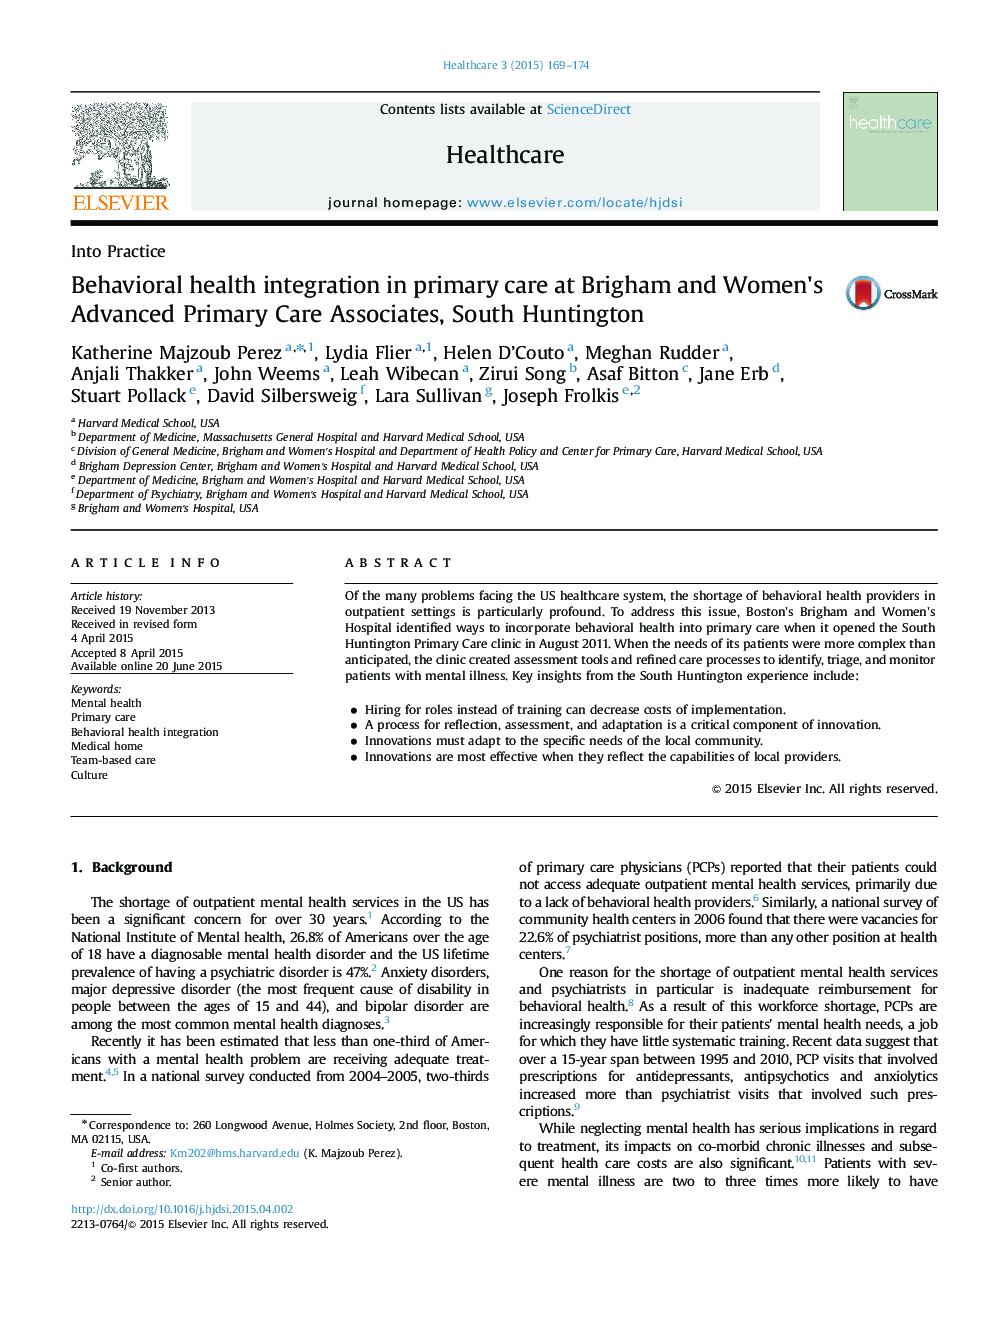 Behavioral health integration in primary care at Brigham and Women×³s Advanced Primary Care Associates, South Huntington